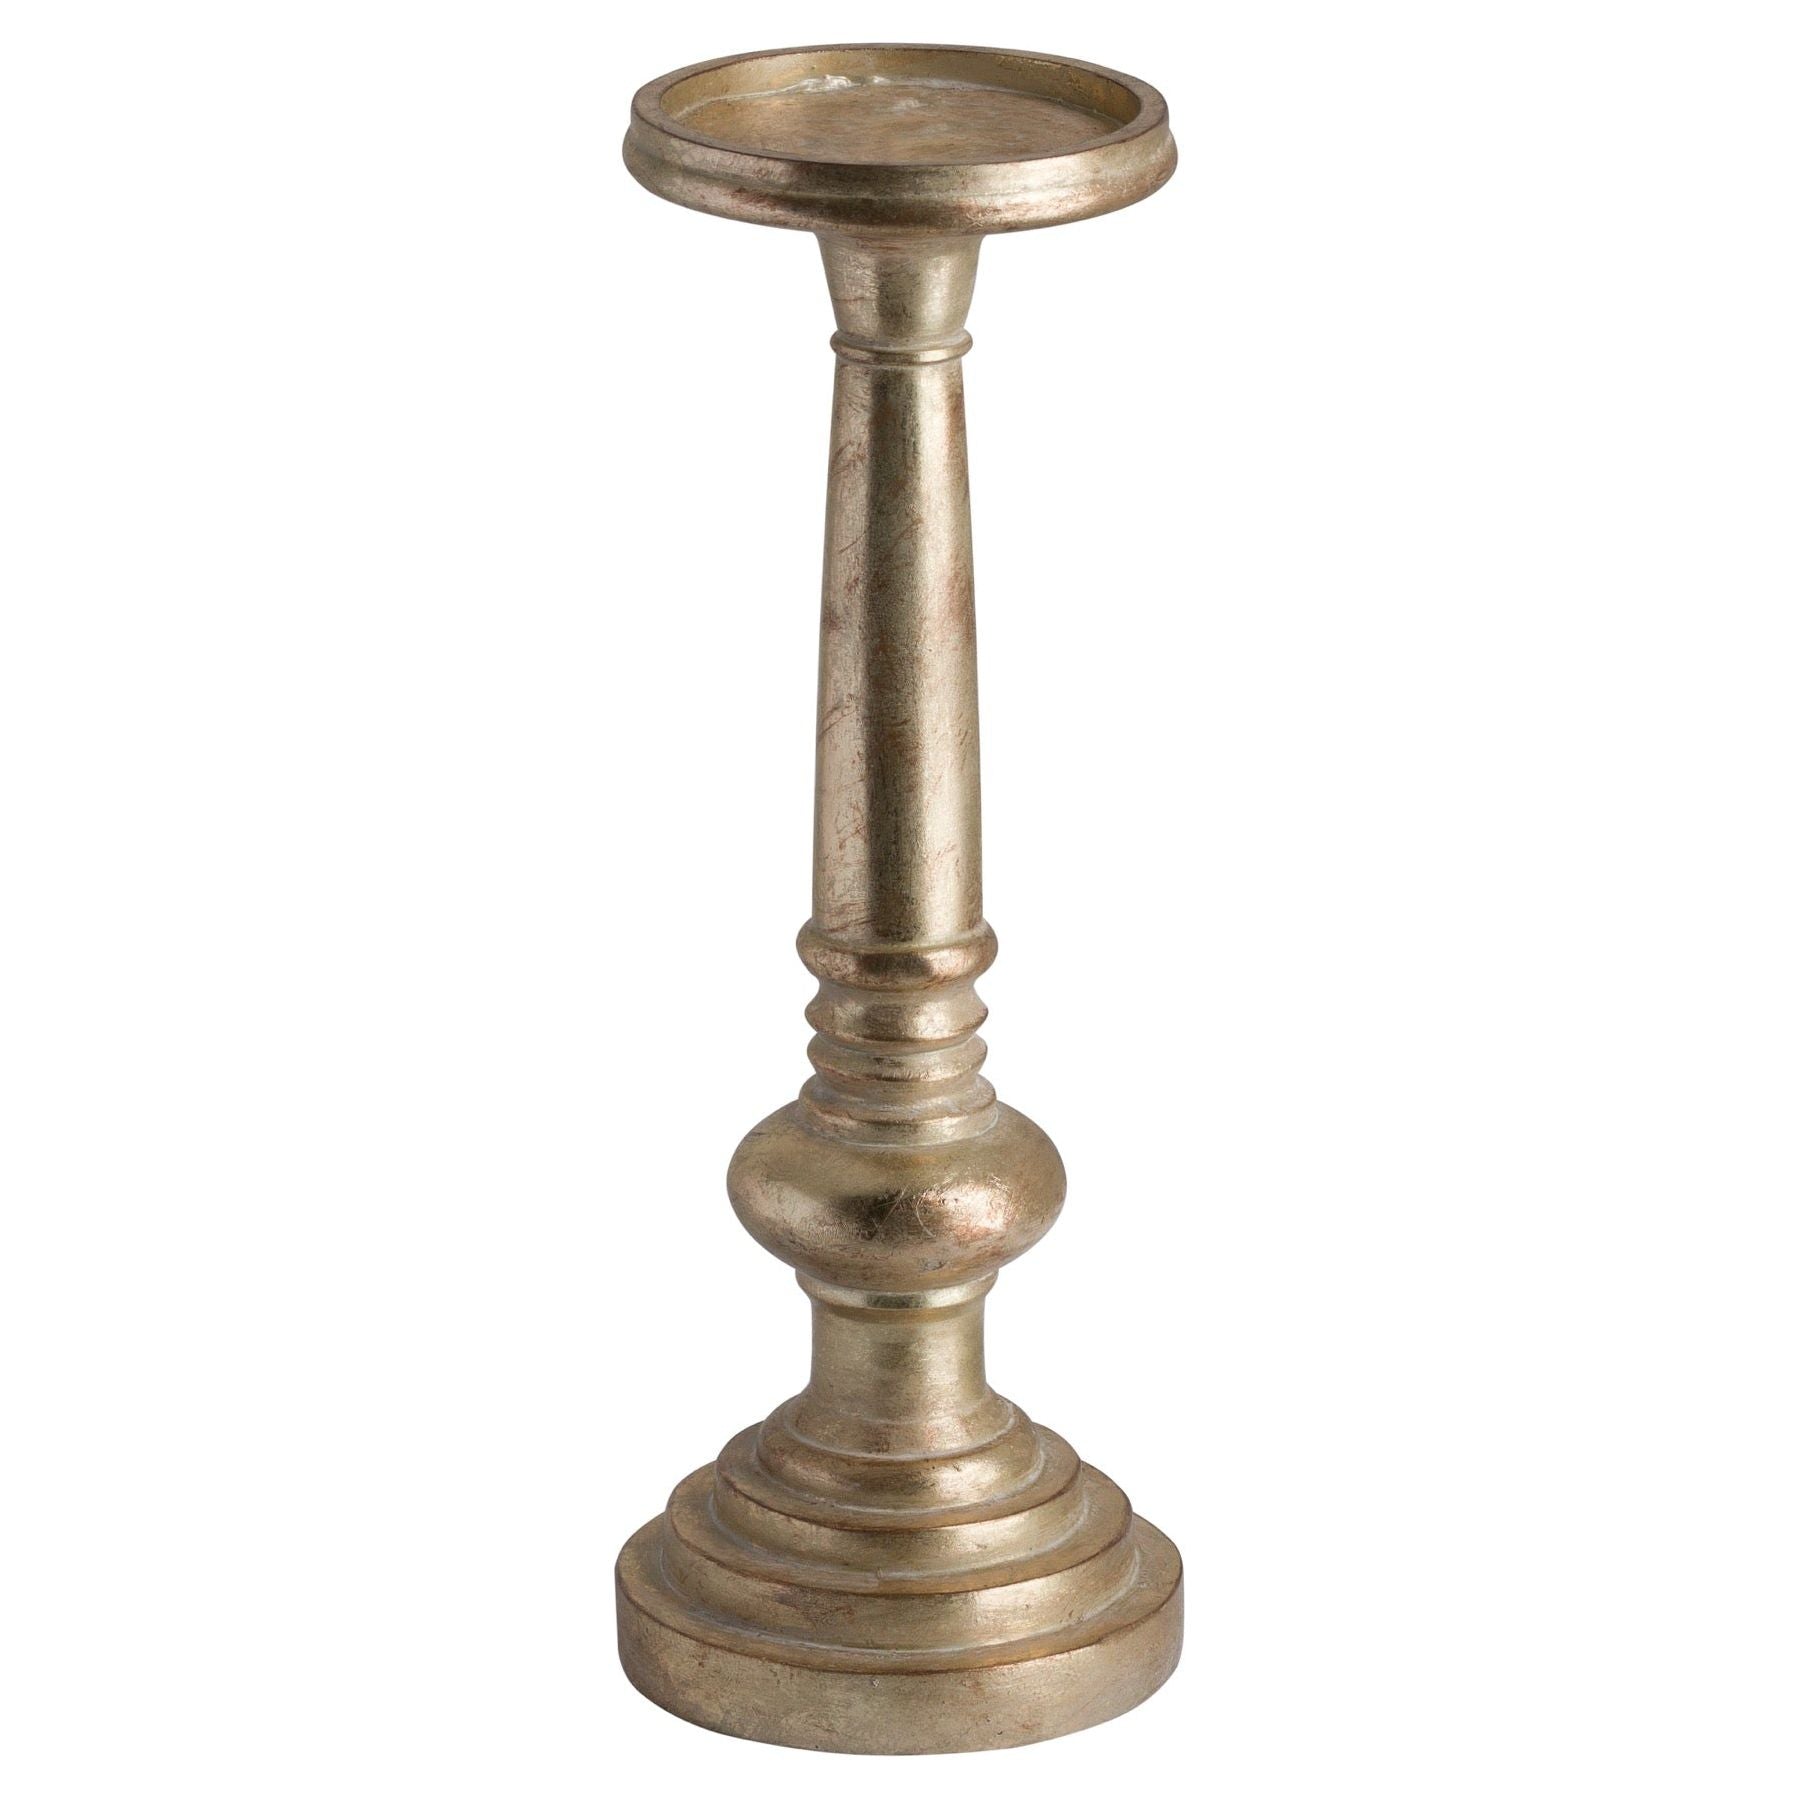 Antique Brass Effect Candle Holder - Ashton and Finch